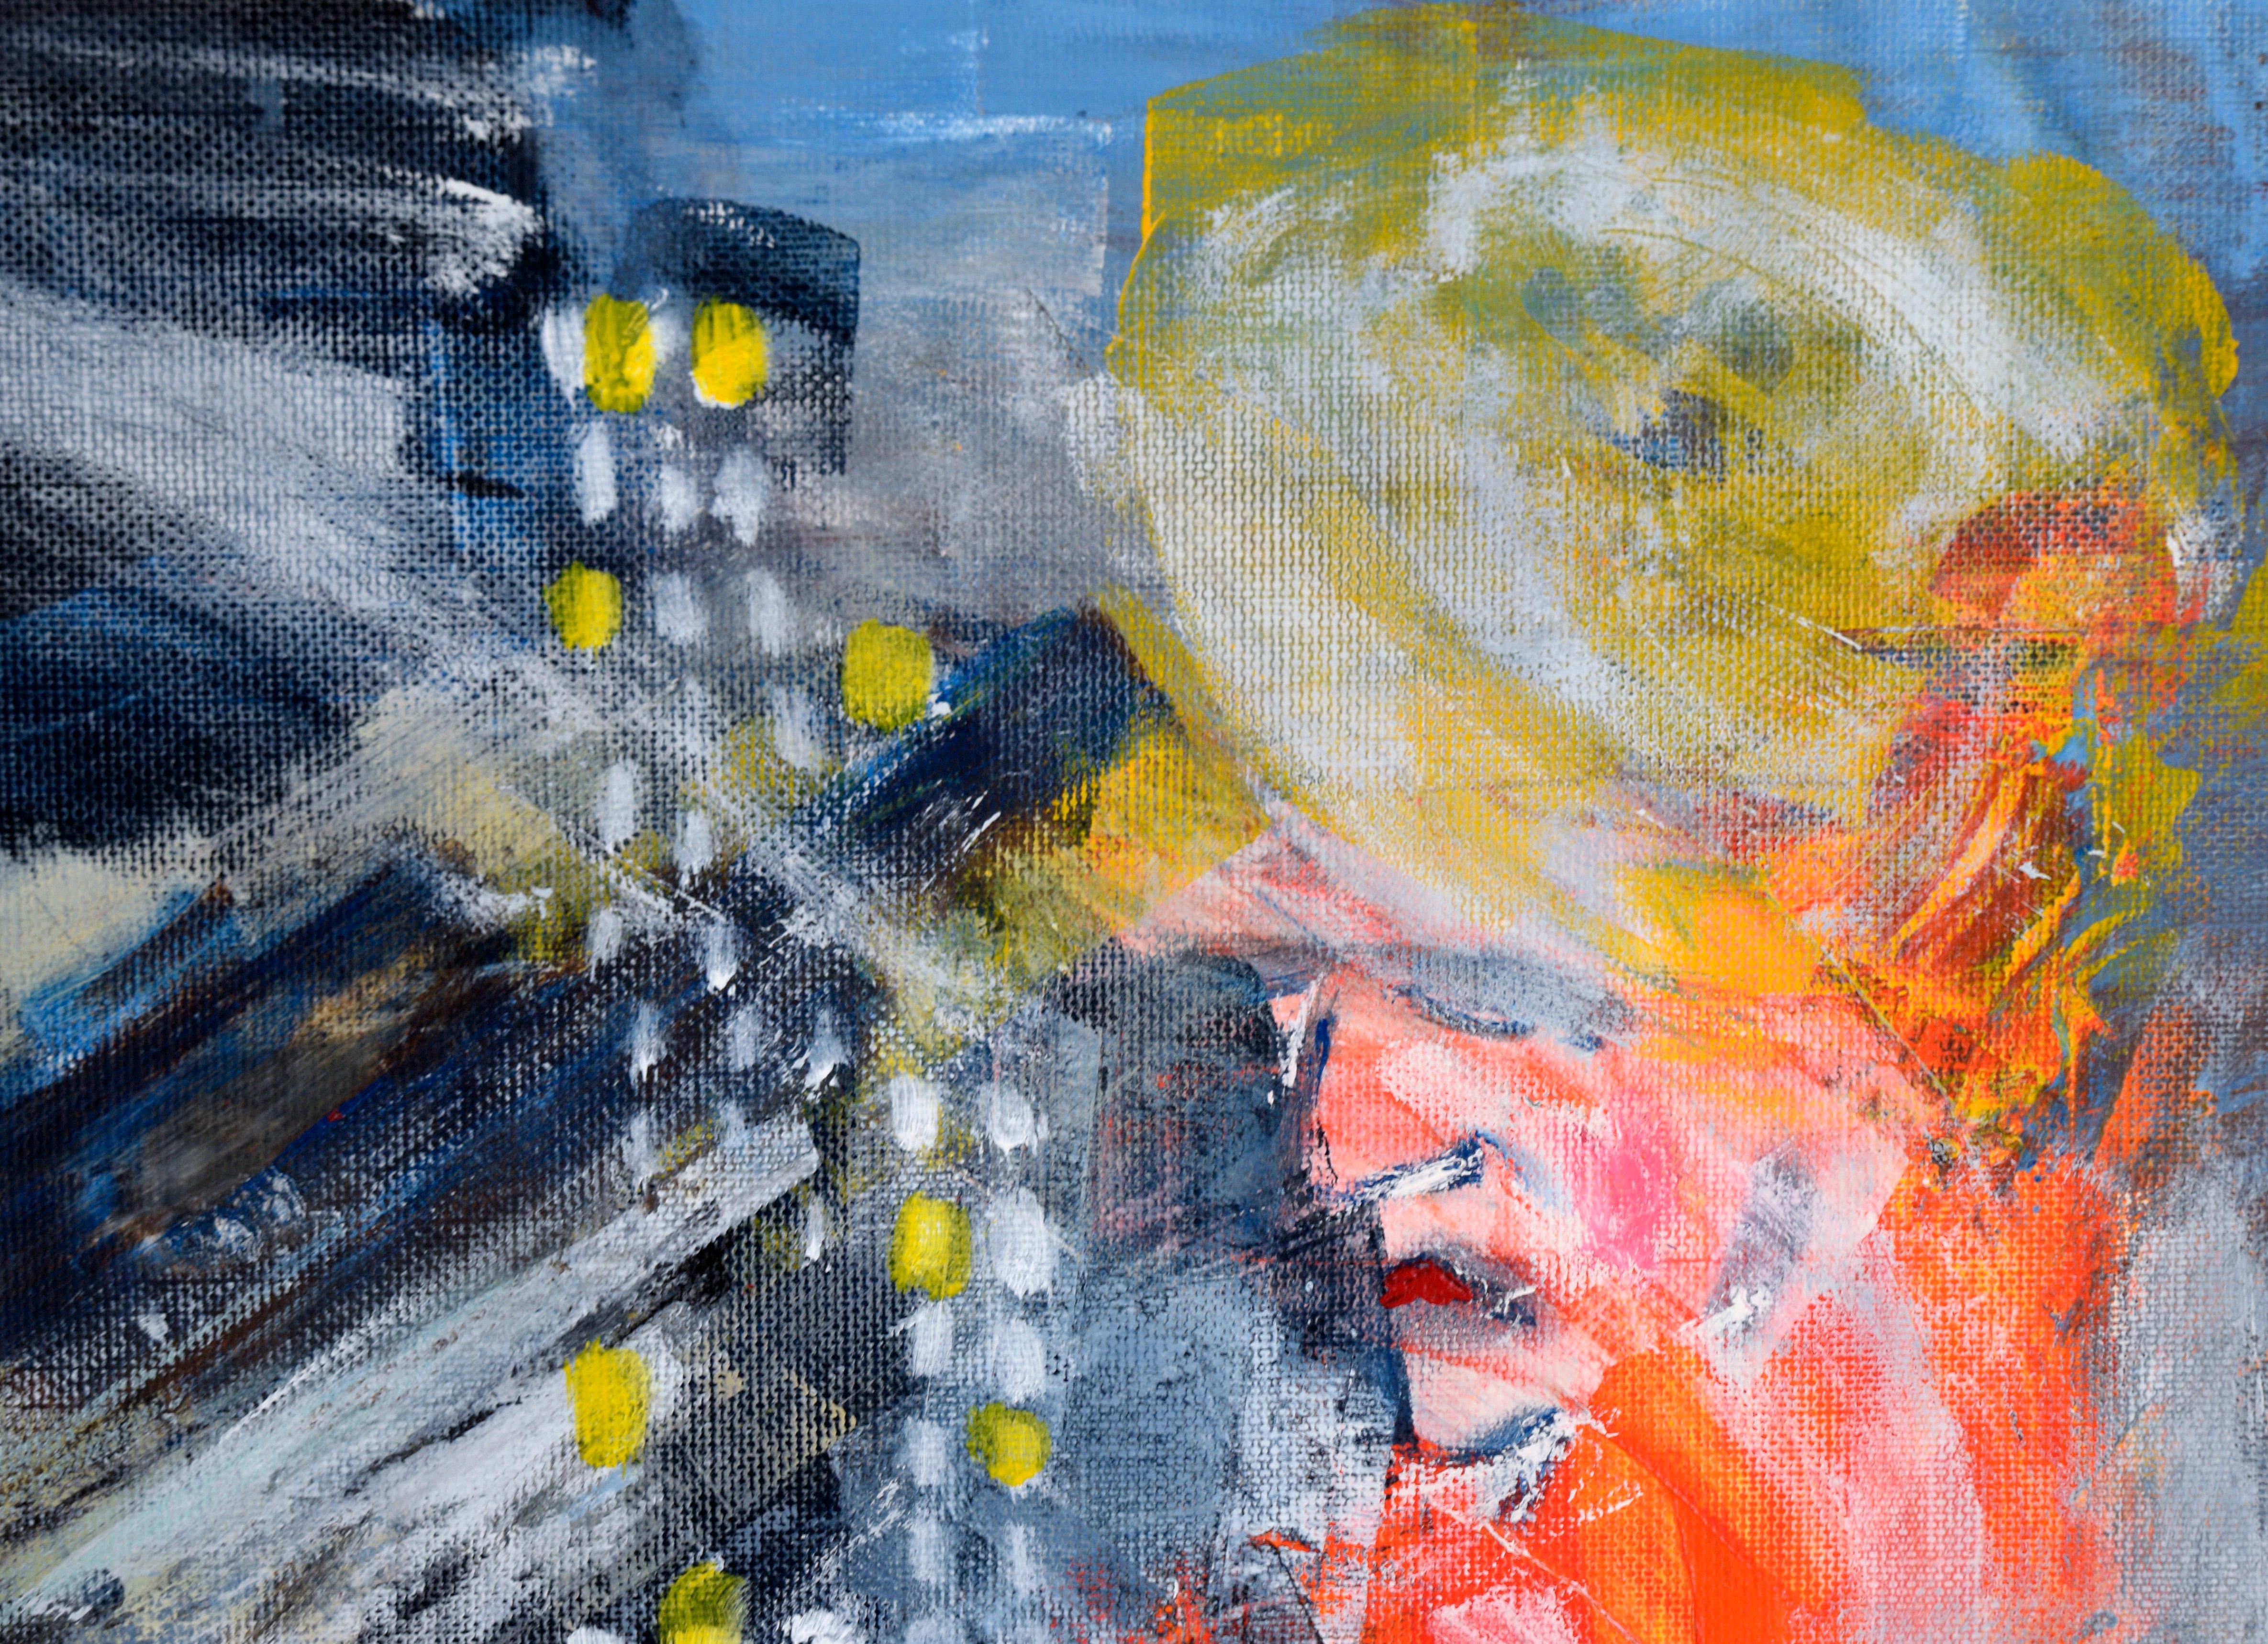 David Bowie - New York - Urban Landscape in Acrylic on Textured Paper - Painting by Ricardo de Silva